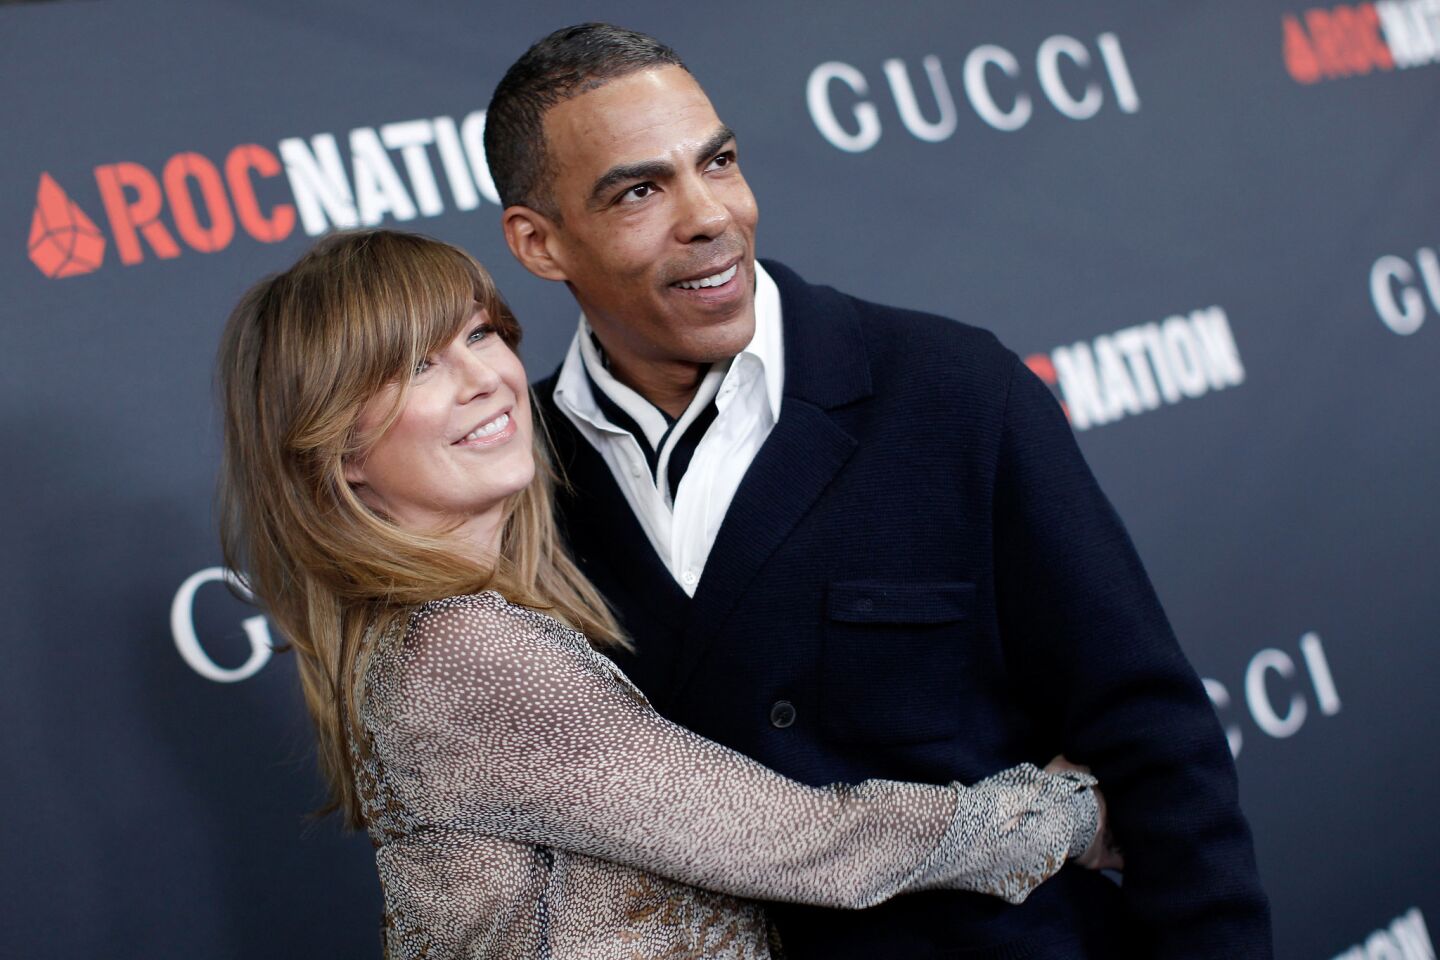 Actress Ellen Pompeo and music producer husband Chris Ivery have welcomed their second child, a baby girl, via surrogate. The little one named Sienna May Ivery joins older sister Stella Luna, born in September 2009.